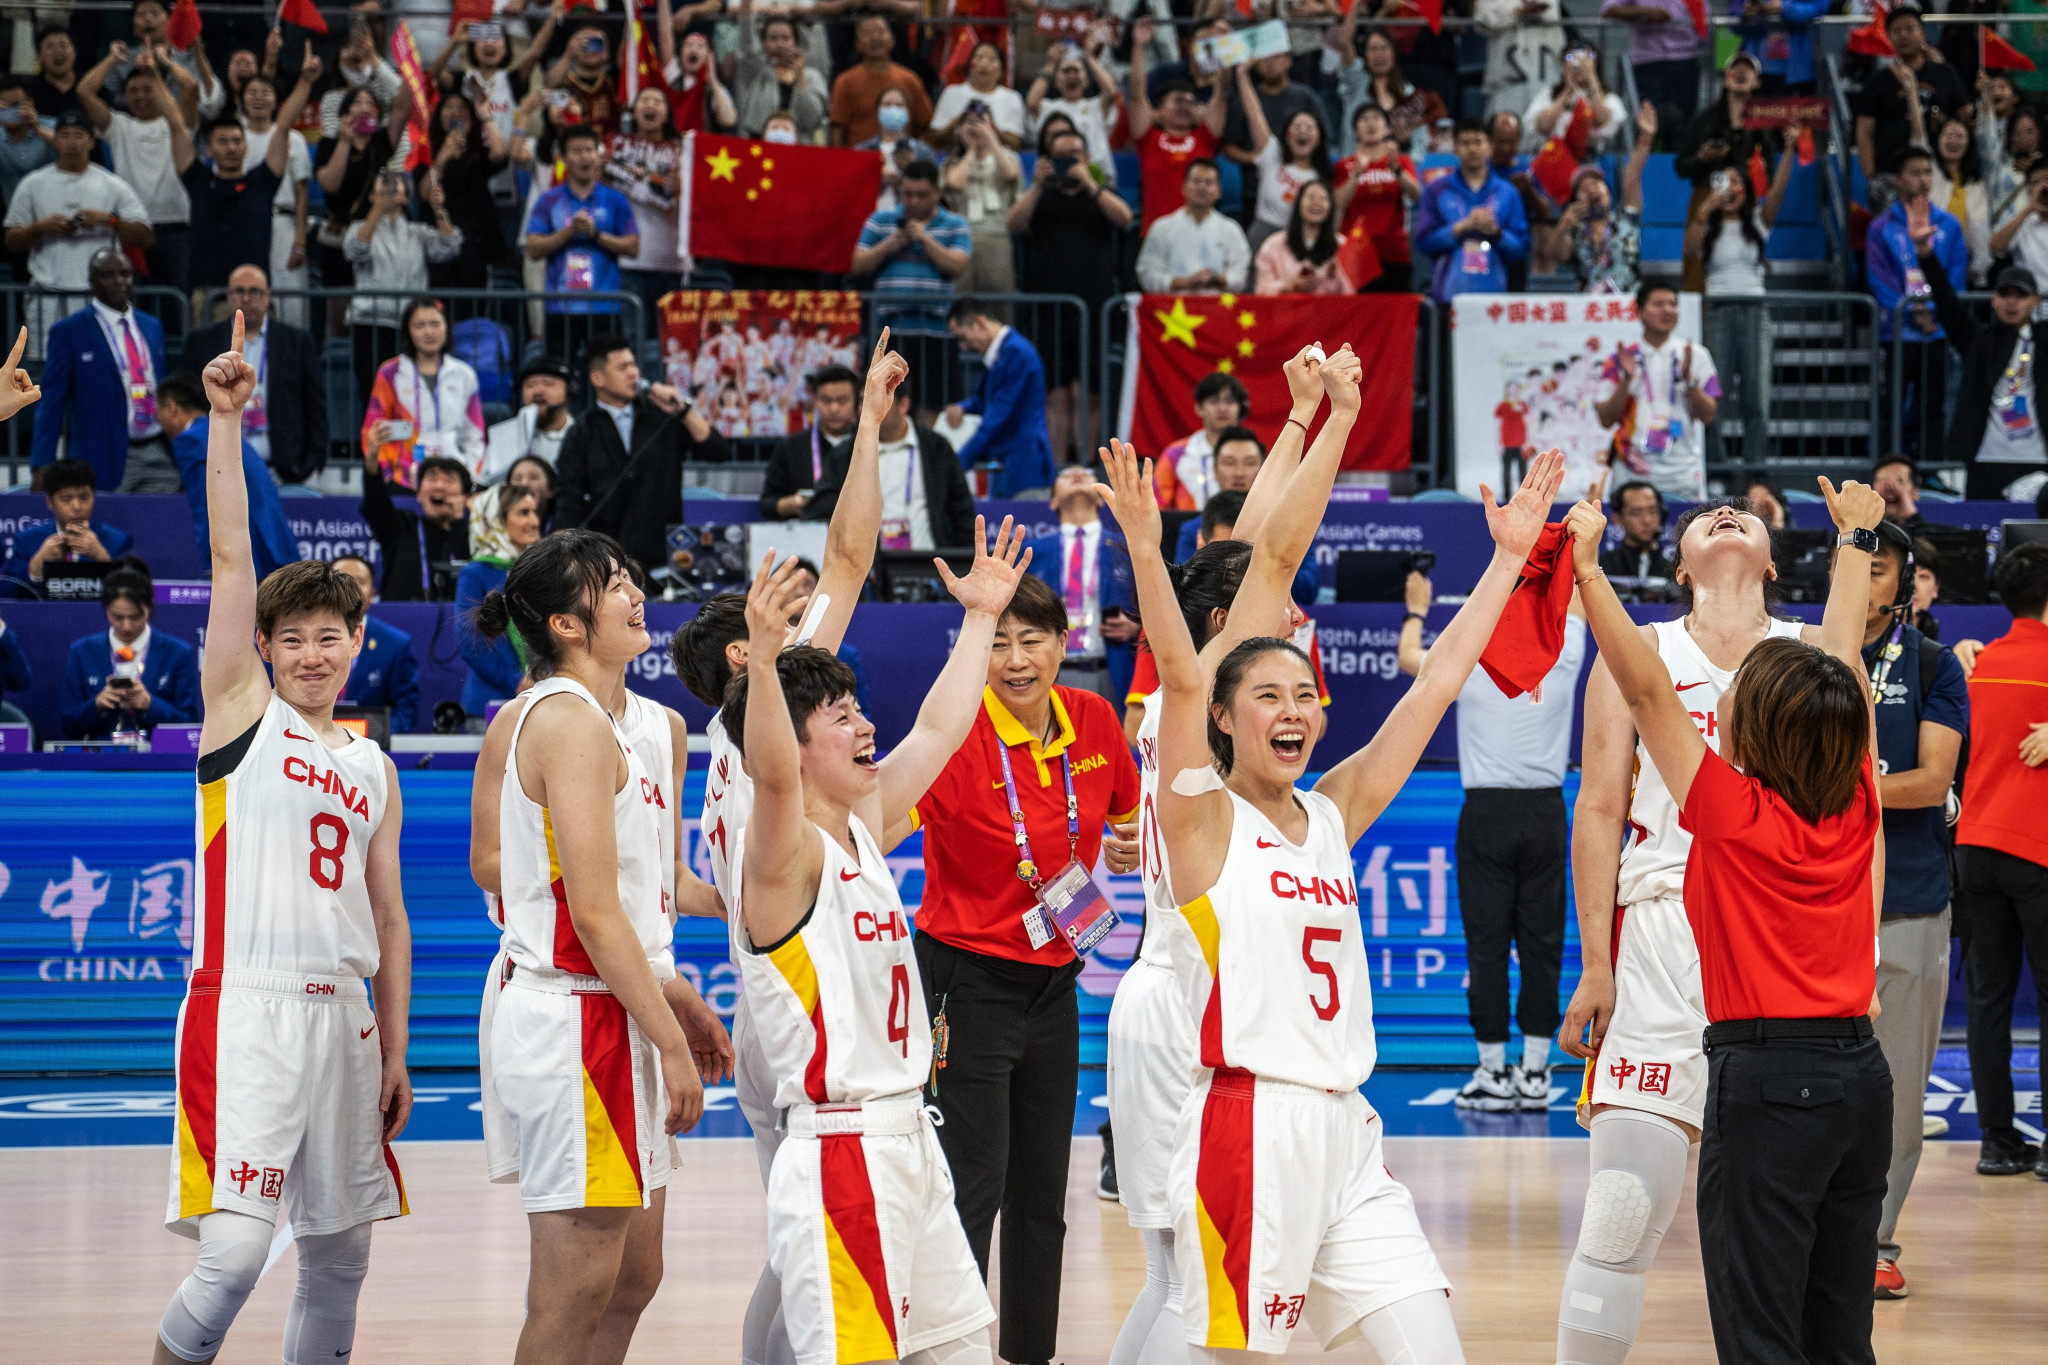 China claimed 201 gold medals as Hangzhou successfully staged the biggest-ever Asian Games ©Getty Images